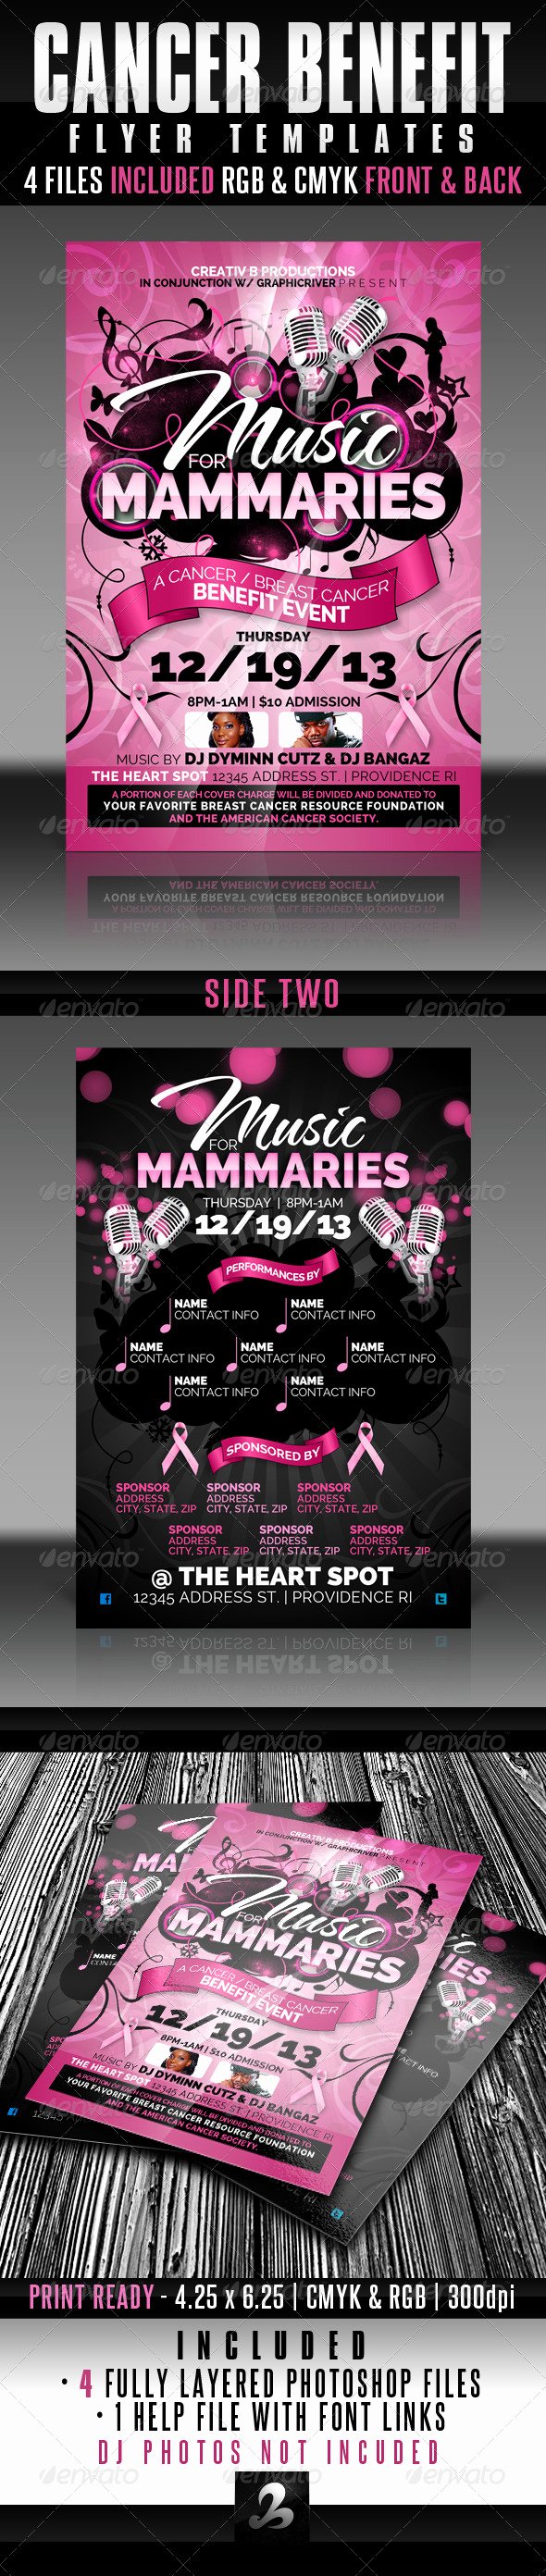 Benefit Flyer Template New Cancer Benefit Flyer Templates by Creativb